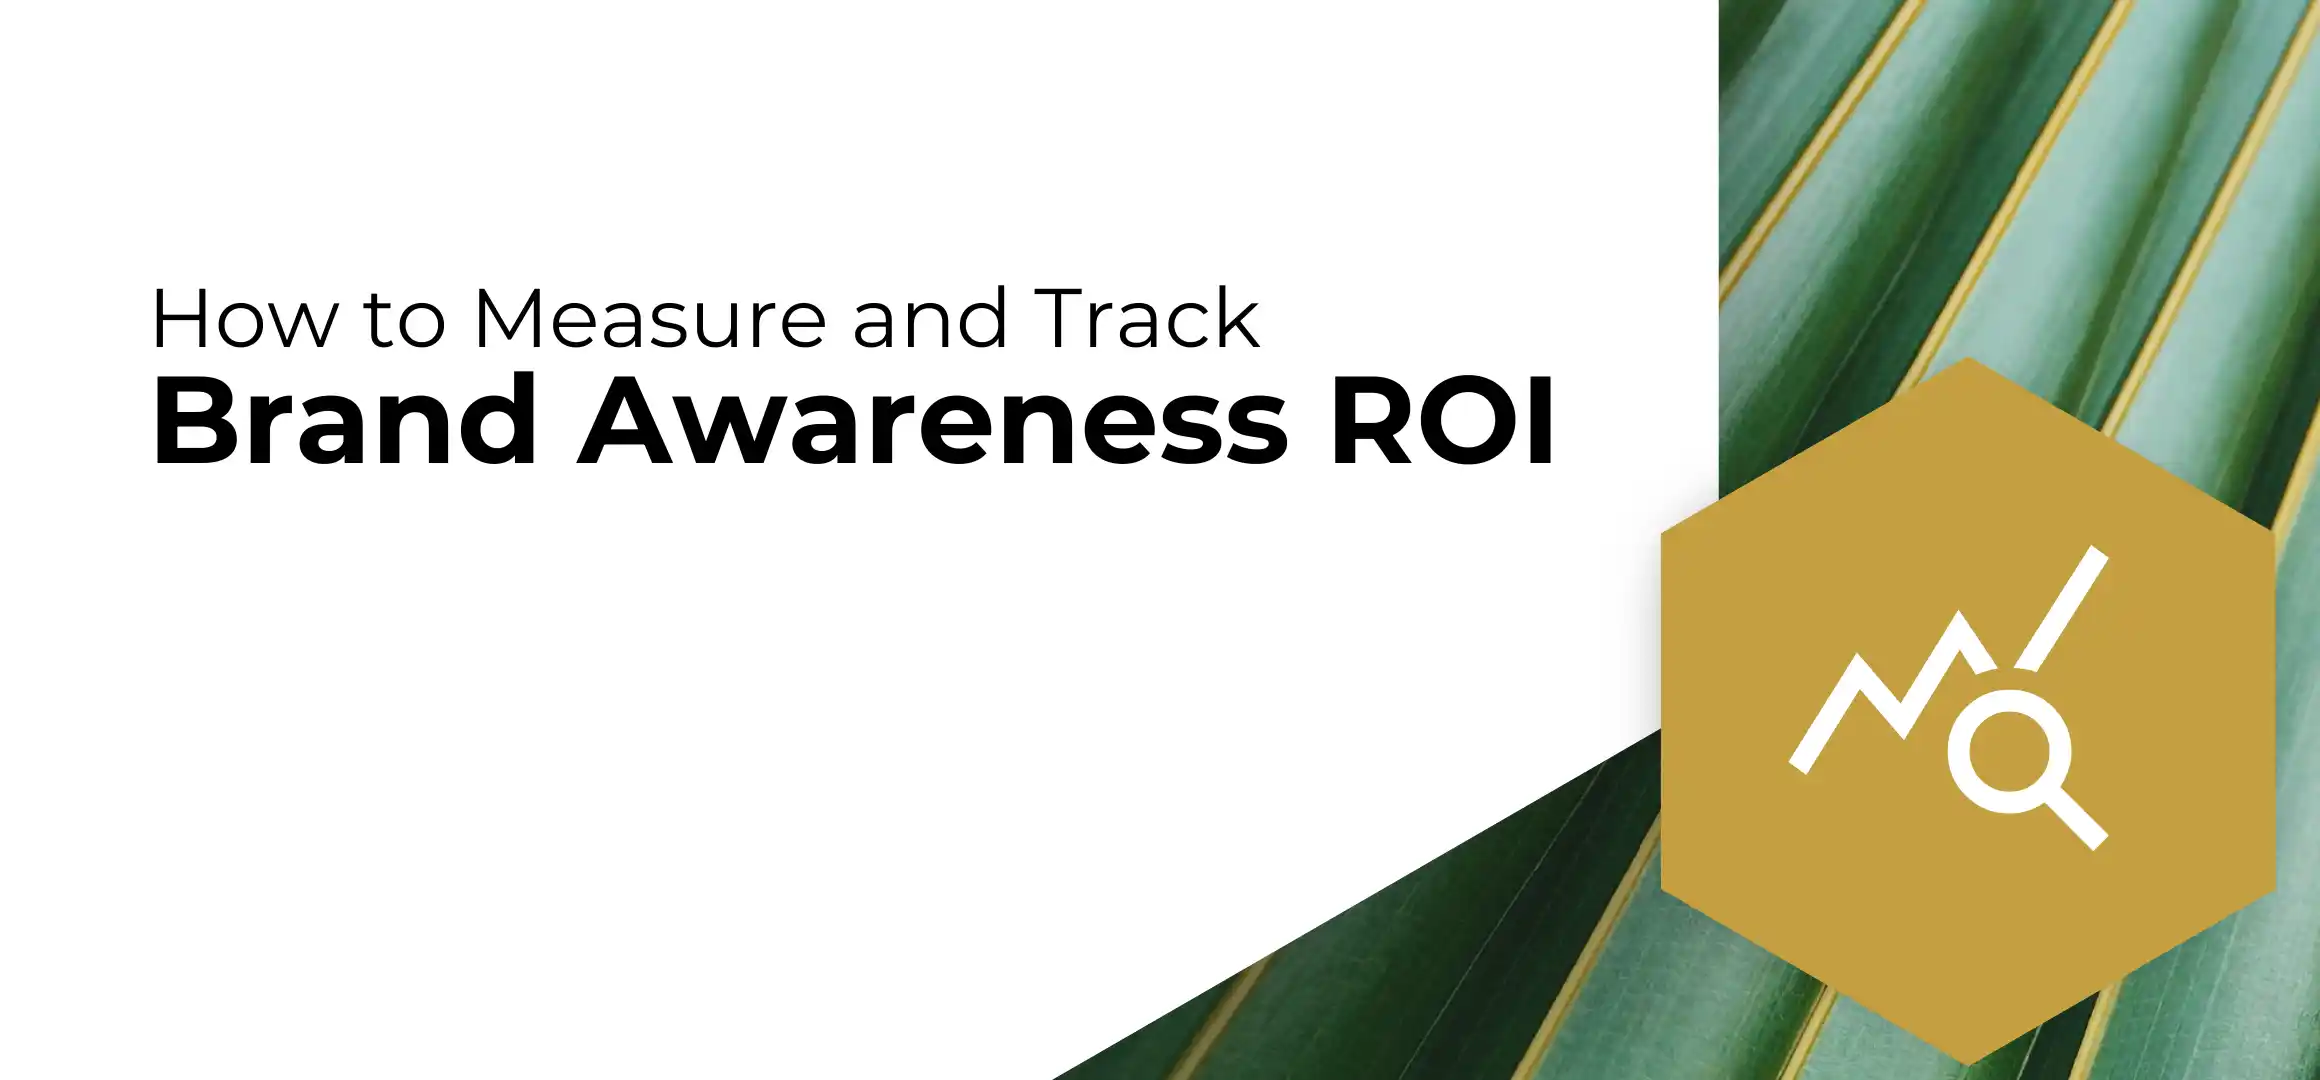 How to Measure and Track Brand Awareness ROI